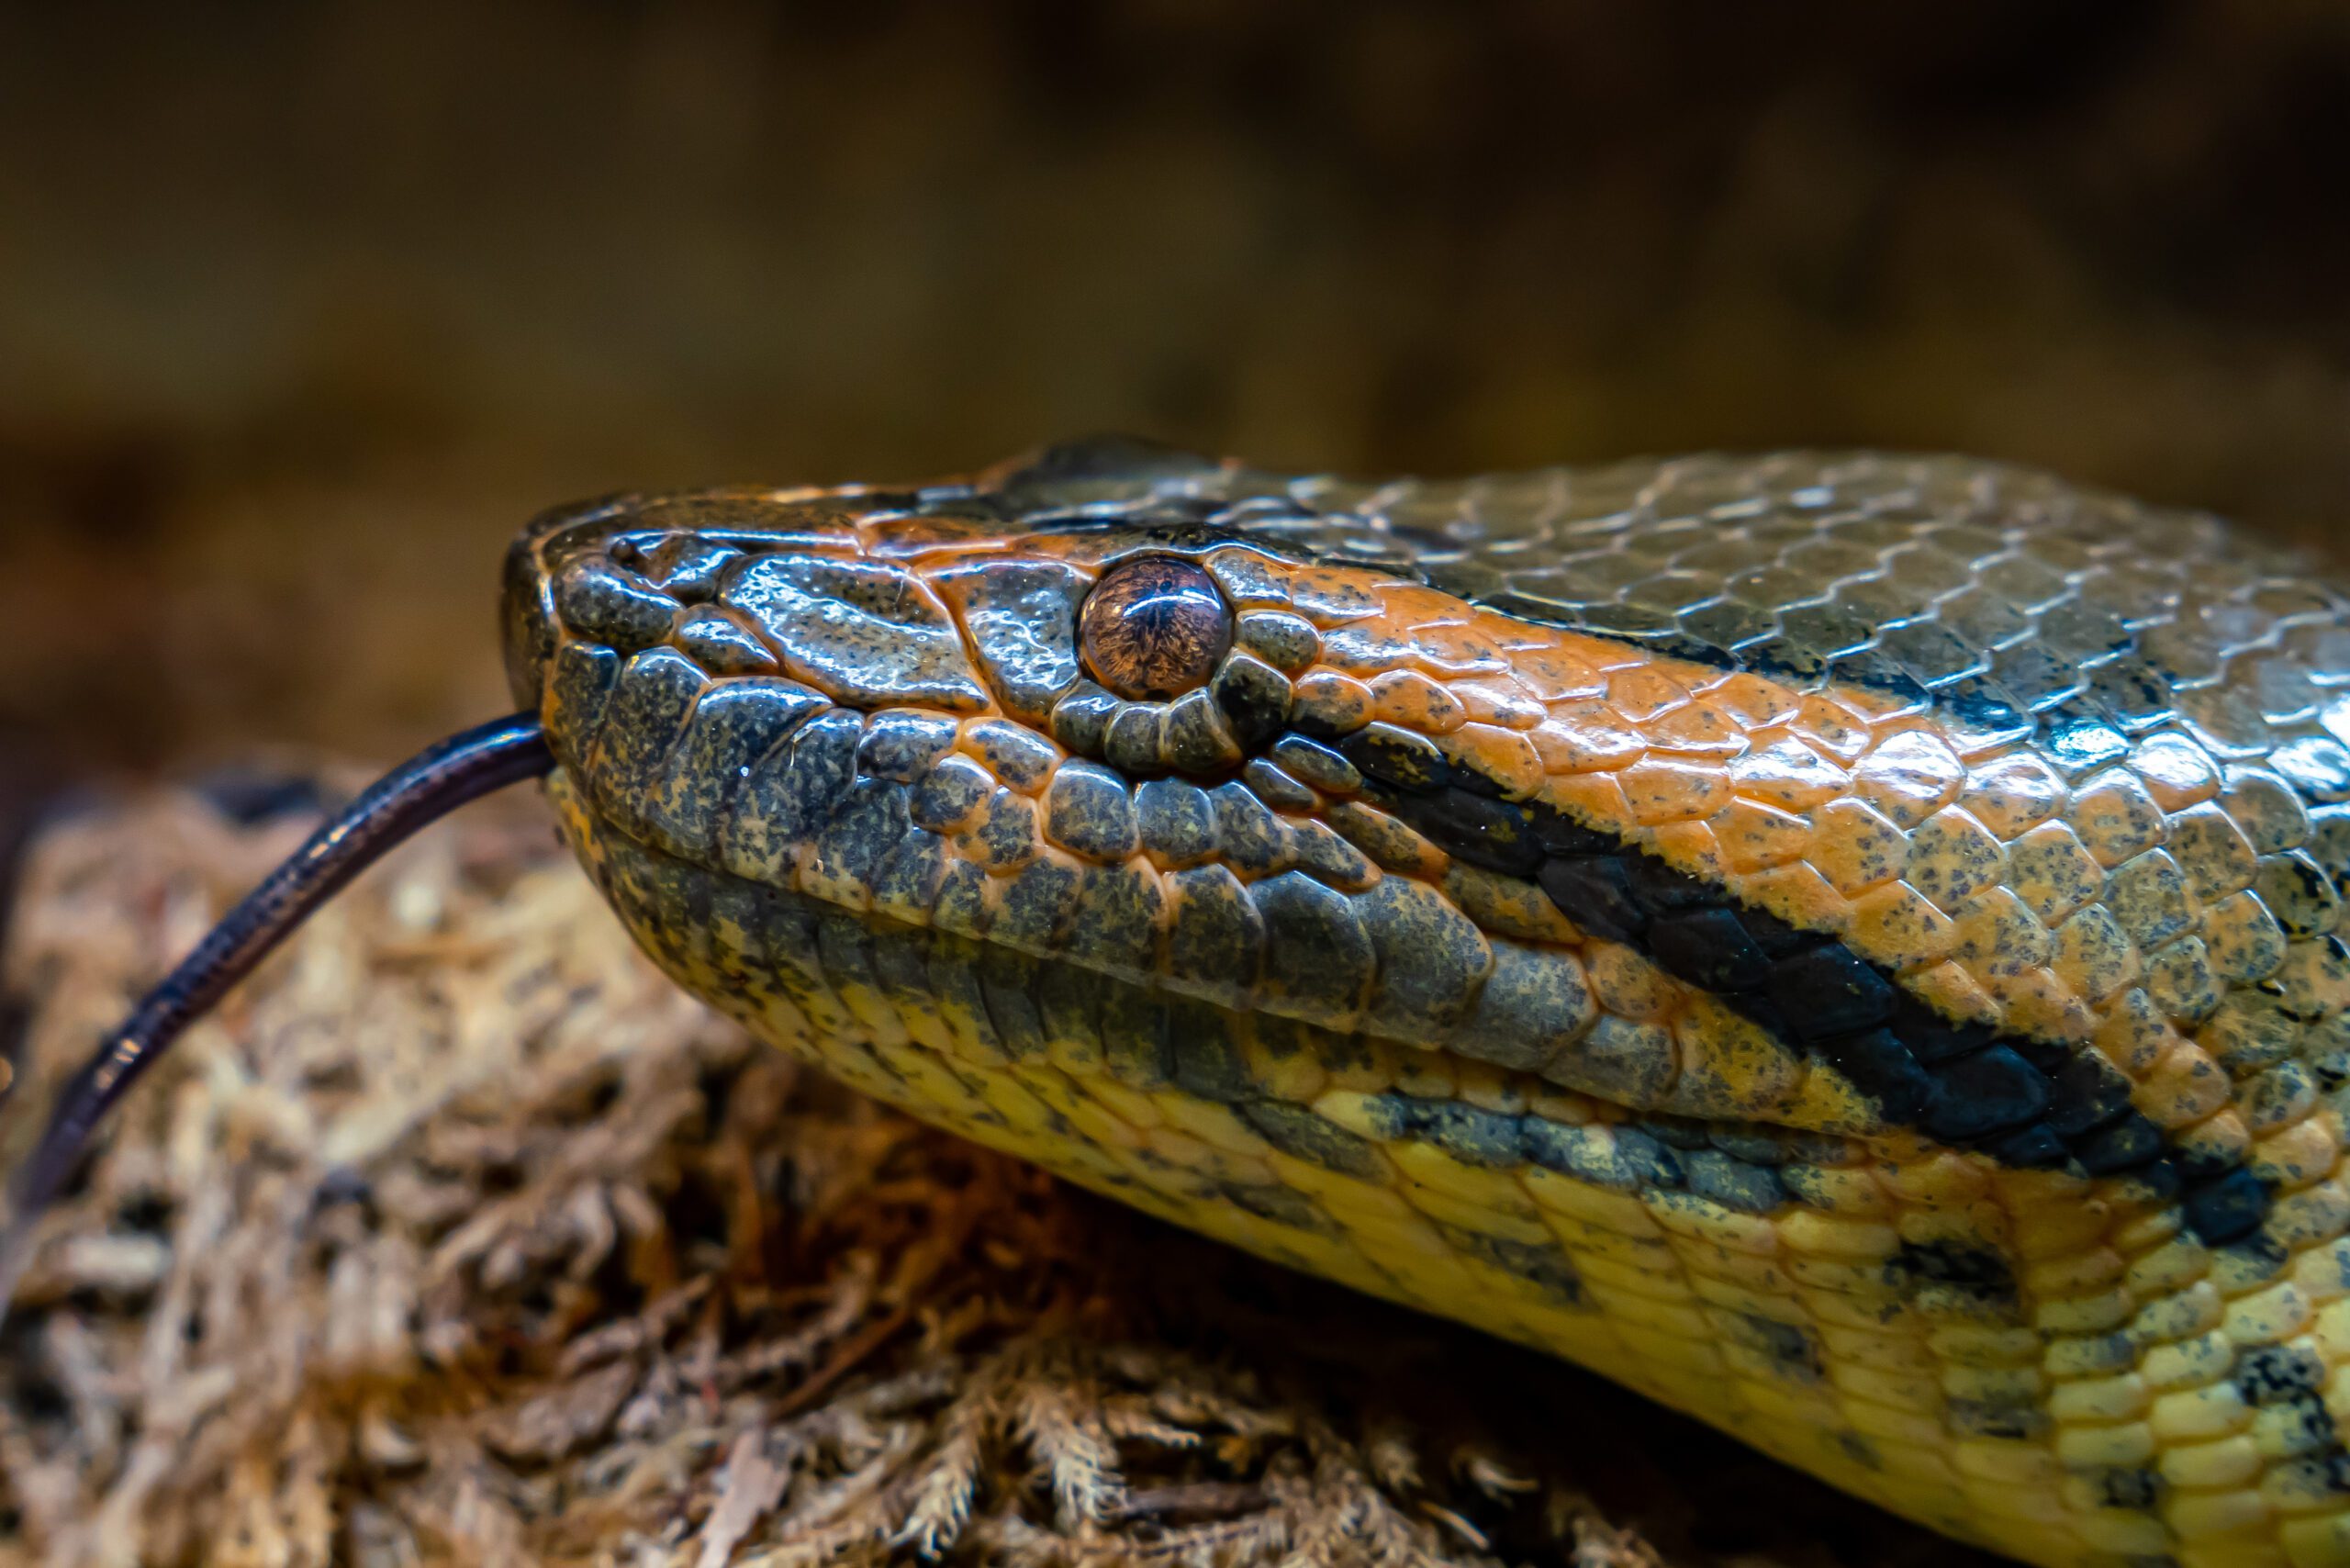 Snakes Are Amazing! 5 of Their Most Extraordinary Abilities